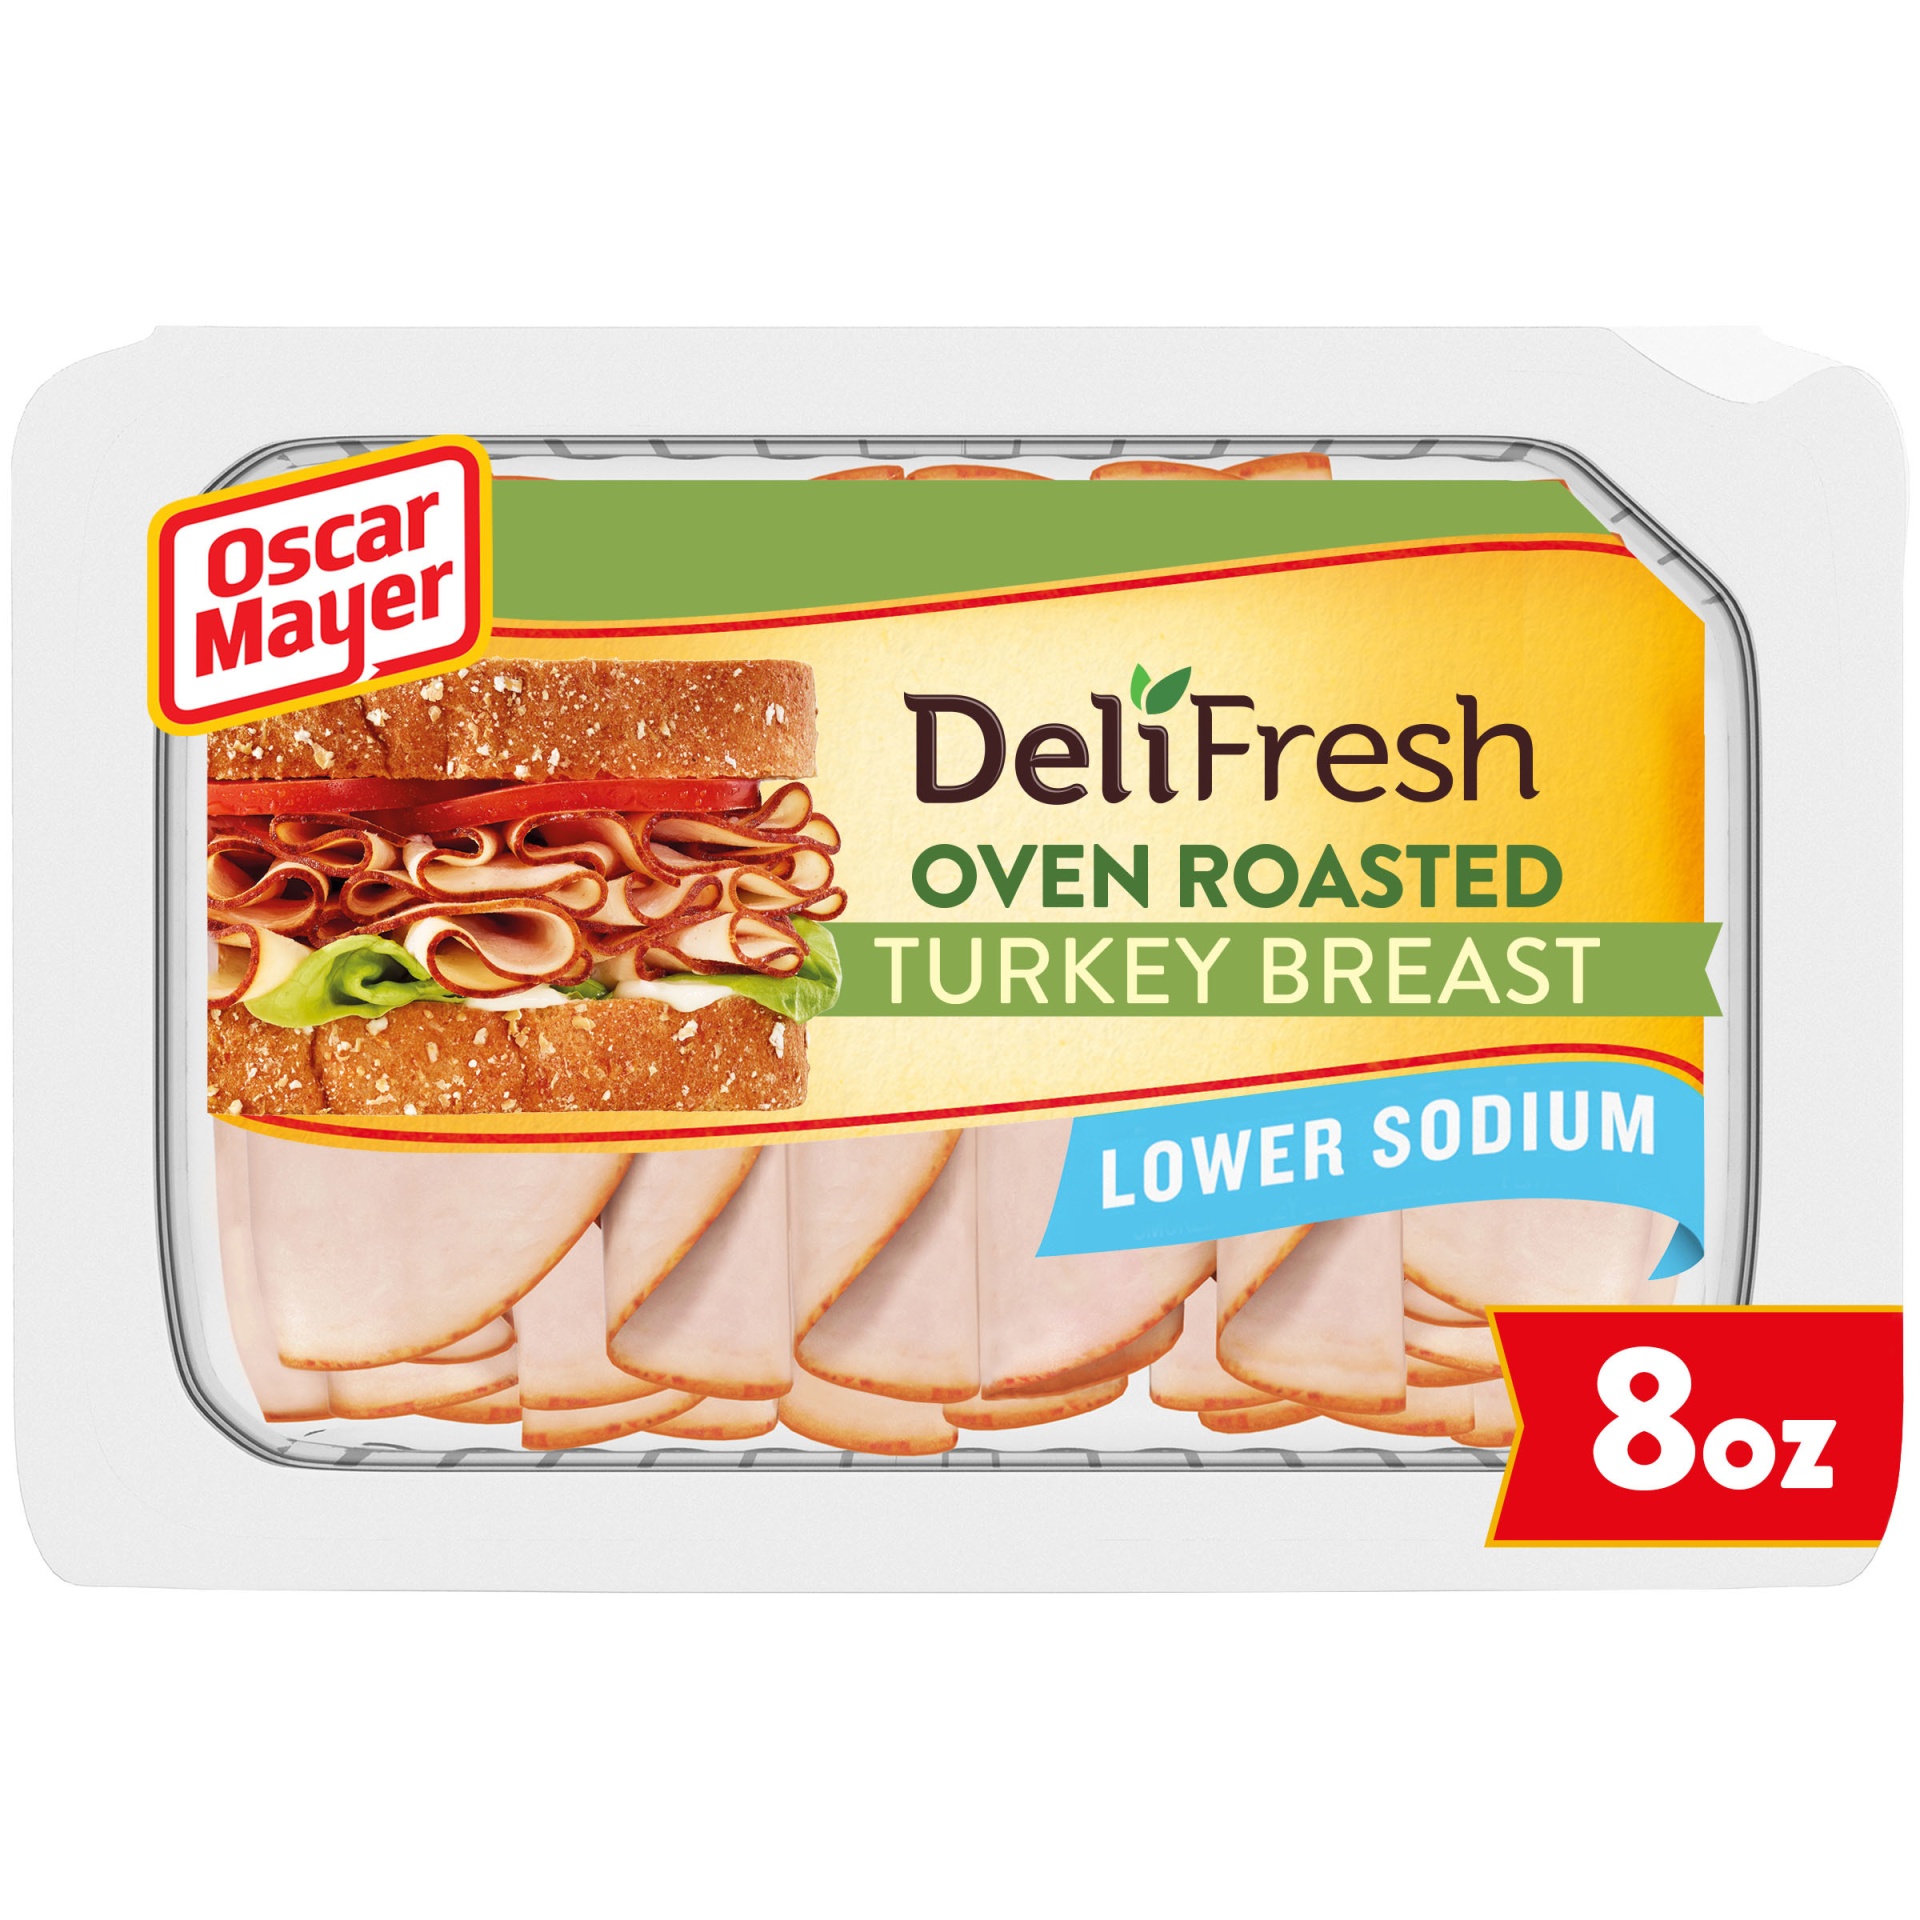 slide 1 of 6, Oscar Mayer Deli Fresh Oven Roasted Turkey Breast Sliced Lunch Meat with 32% Lower Sodium Tray, 8 oz